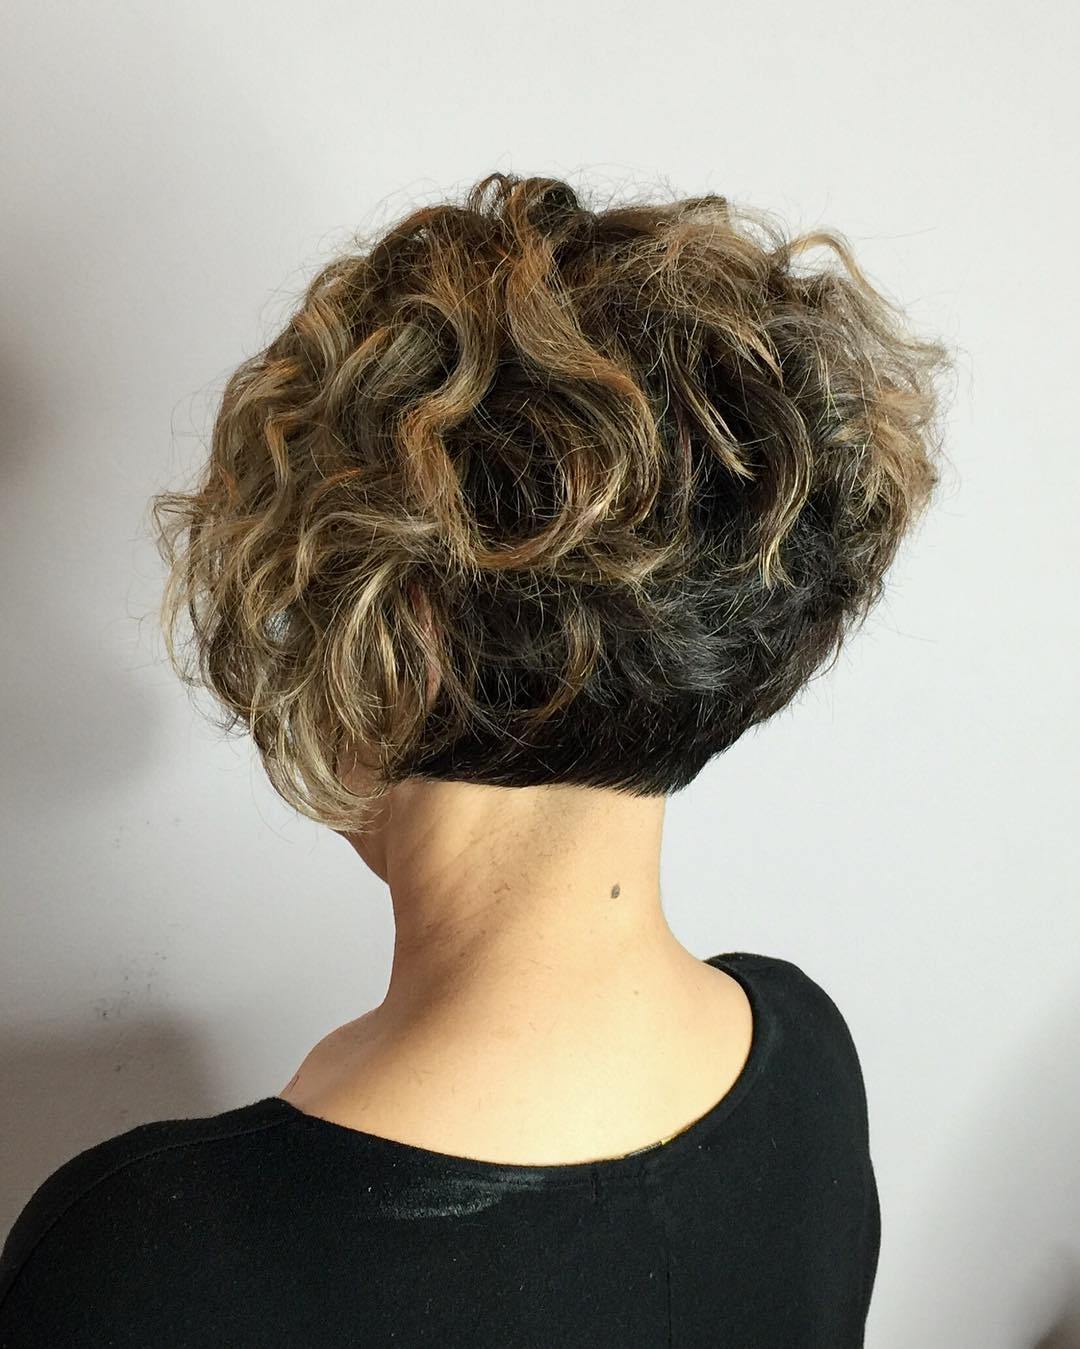 25 Lively Short Haircuts for Curly Hair – Short Wavy Curly Hairstyle